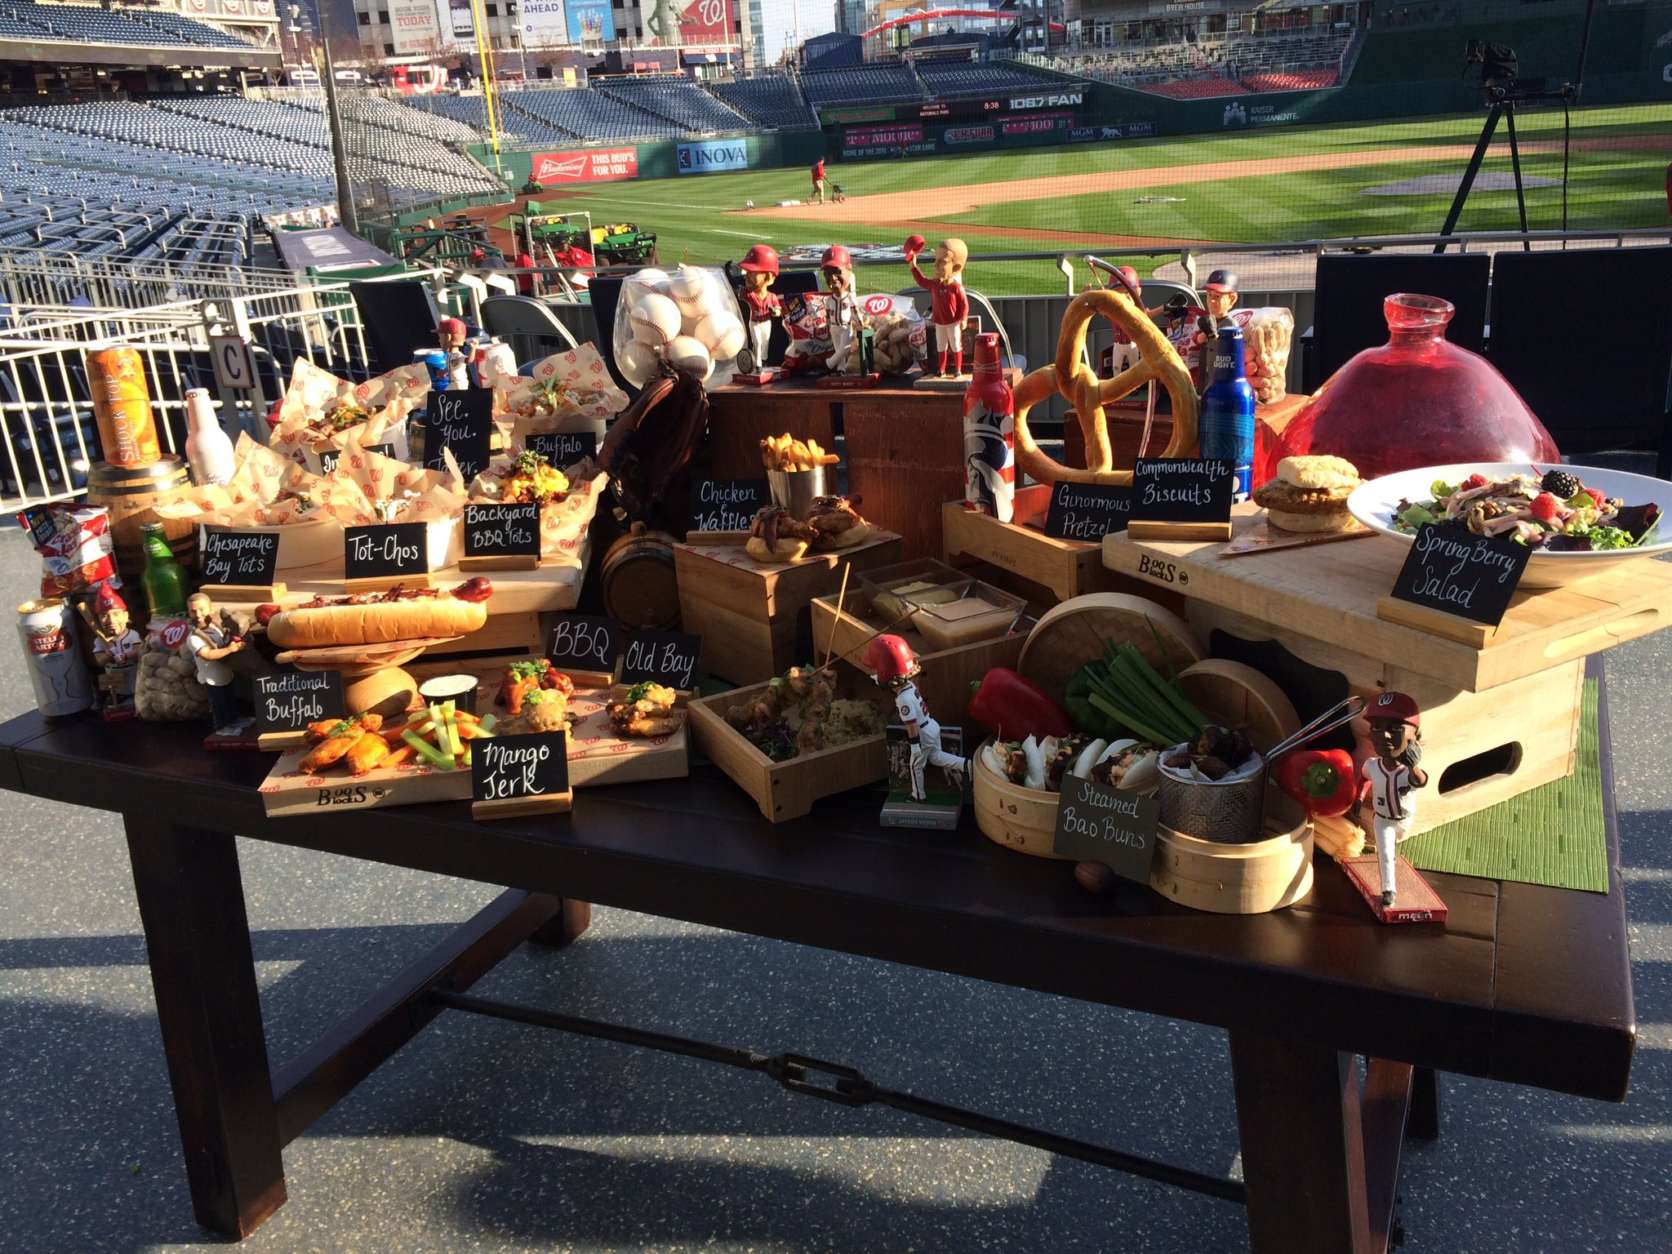 How to choose just one from these glorious concession items at Nationals Park? (WTOP/Nick Iannelli)